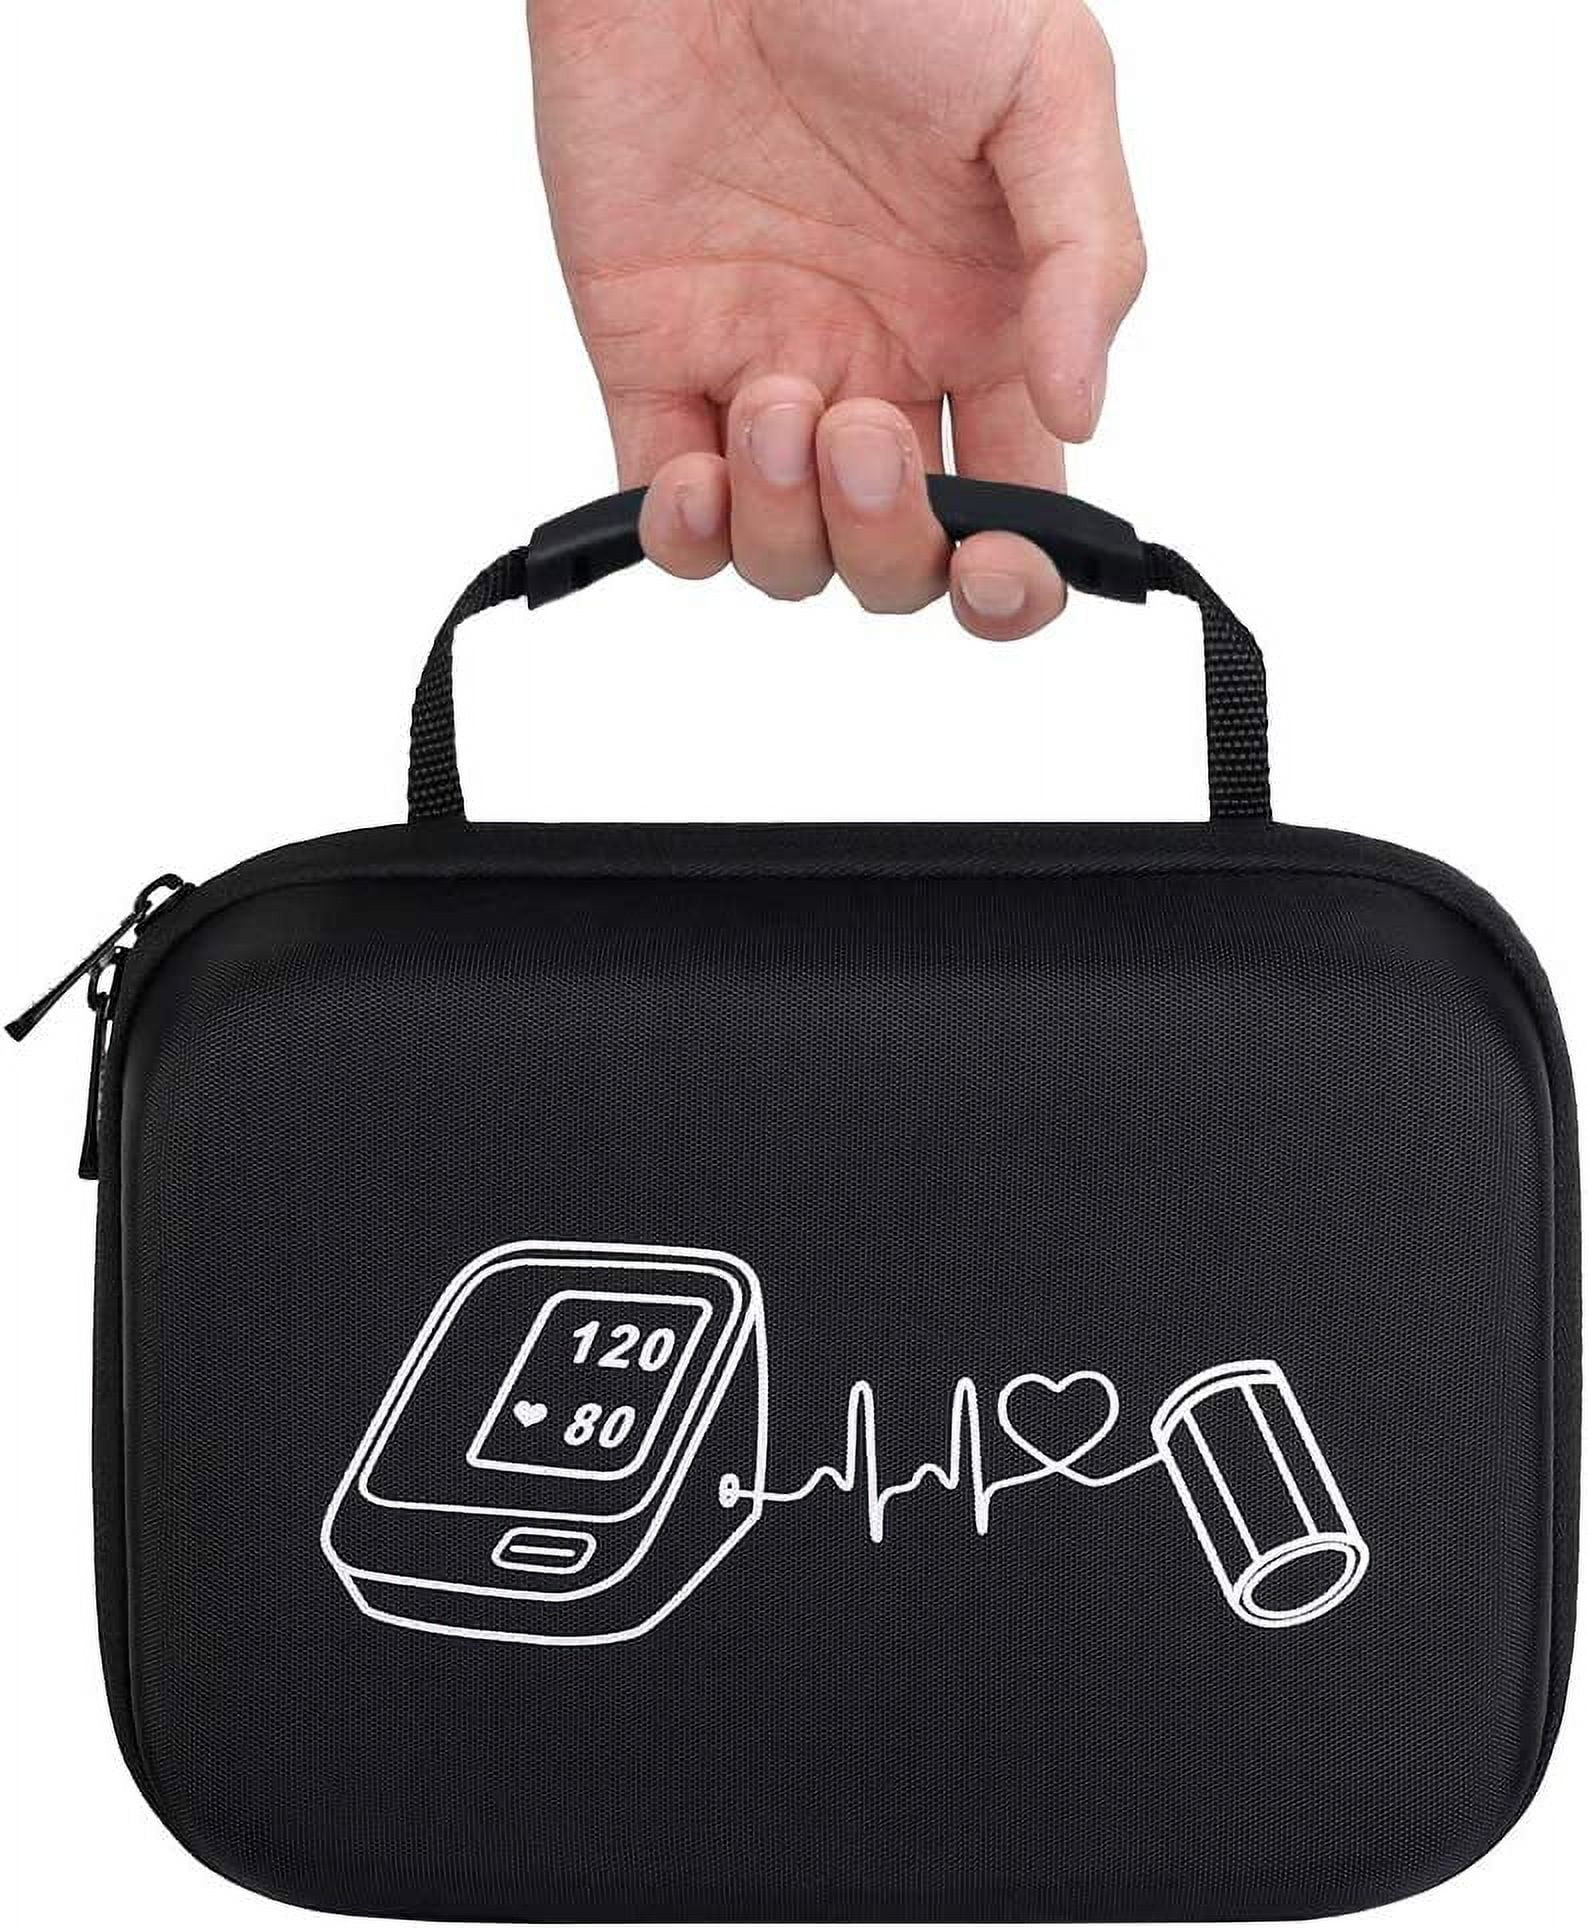 Hard Carrying Case for Omron 10 Series Wireless Upper Arm Blood